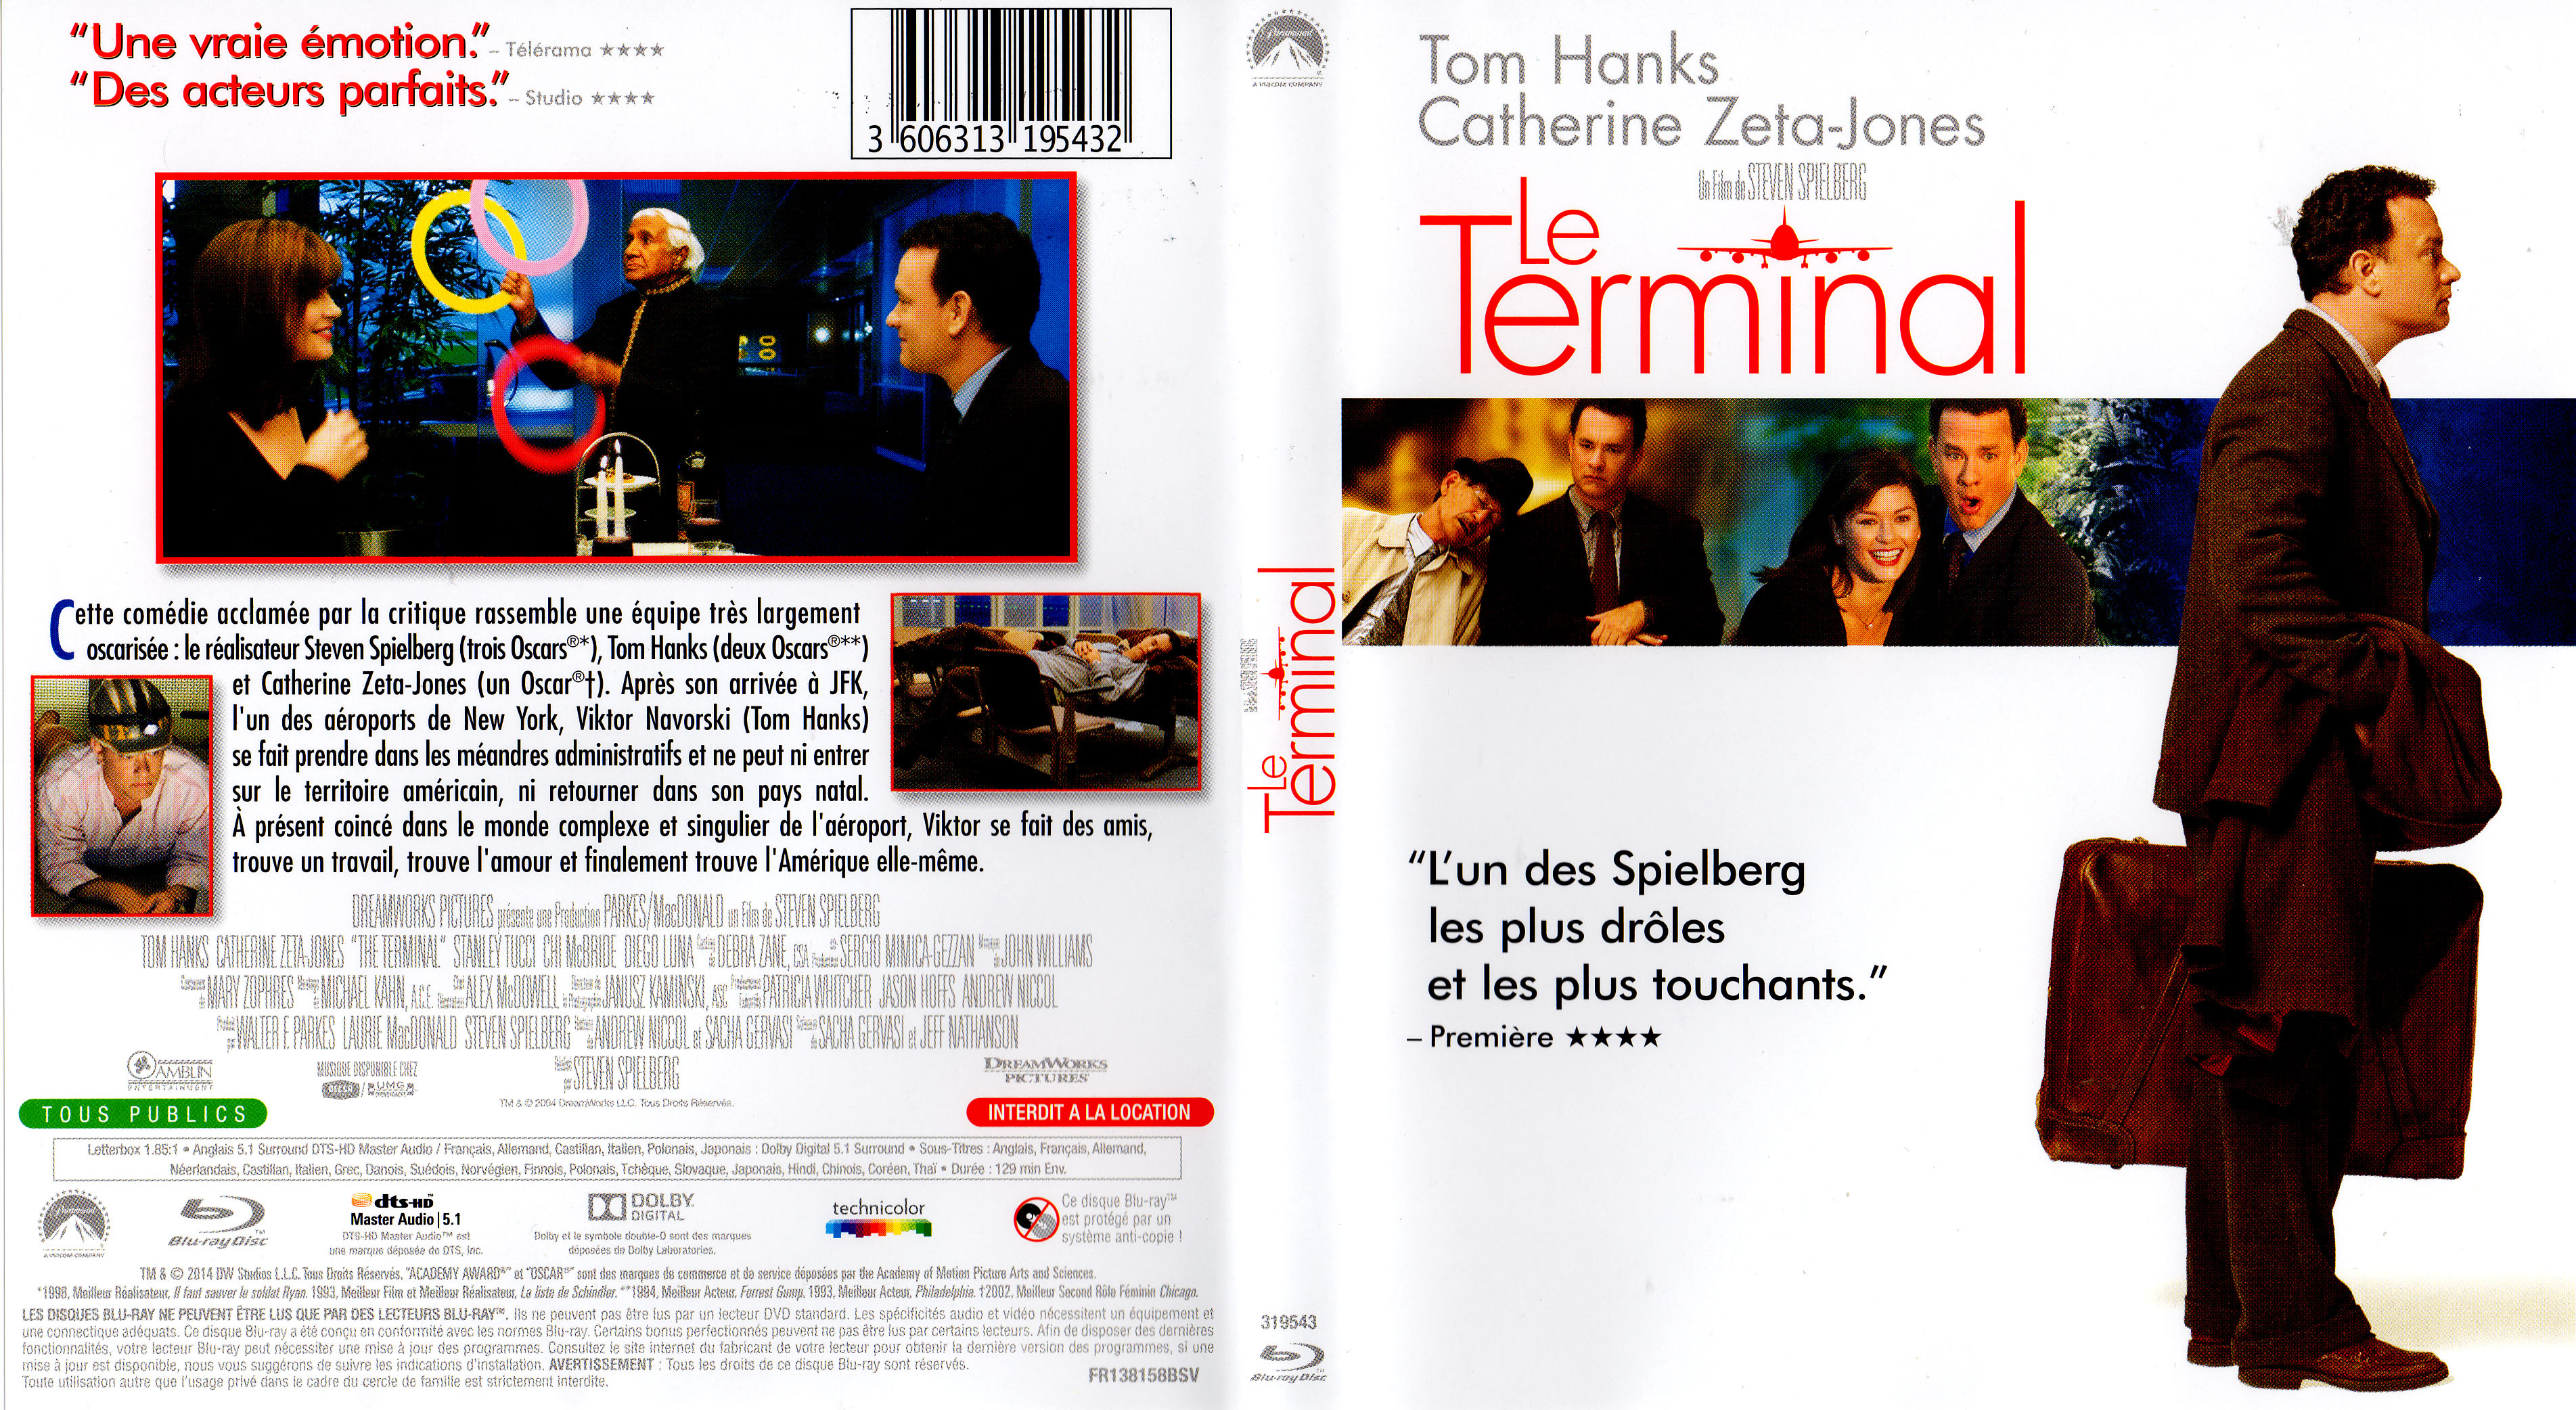 Jaquette DVD Le terminal (BLU-RAY)